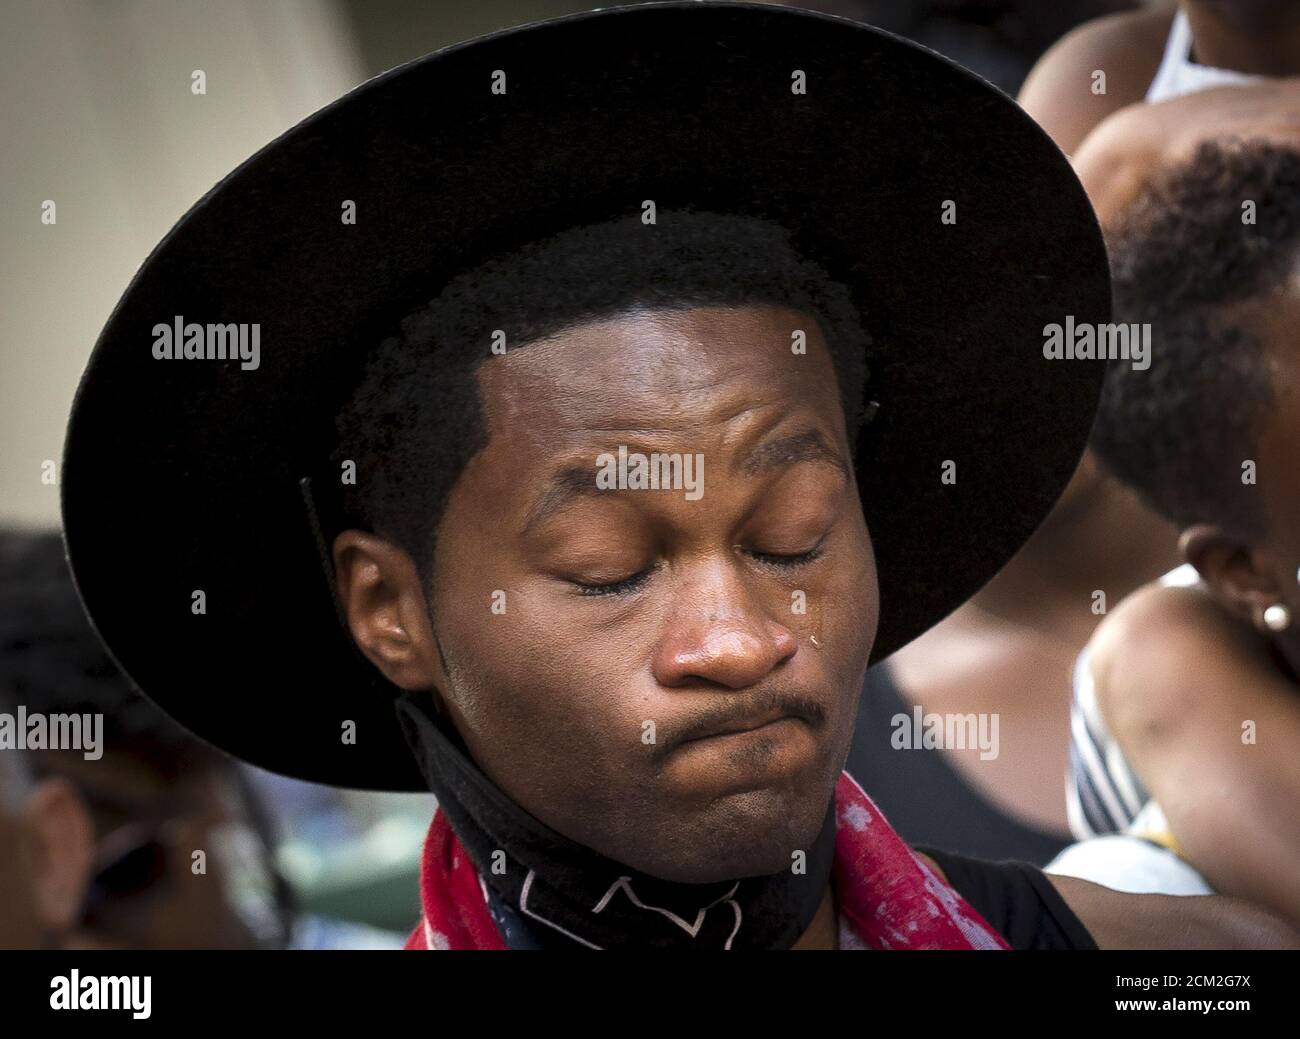 Singer Roman GianArthur takes part in 'Artists Take Fight Against Police Murders' in New York's Times Square August 13, 2015.  REUTERS/Brendan McDermid Stock Photo